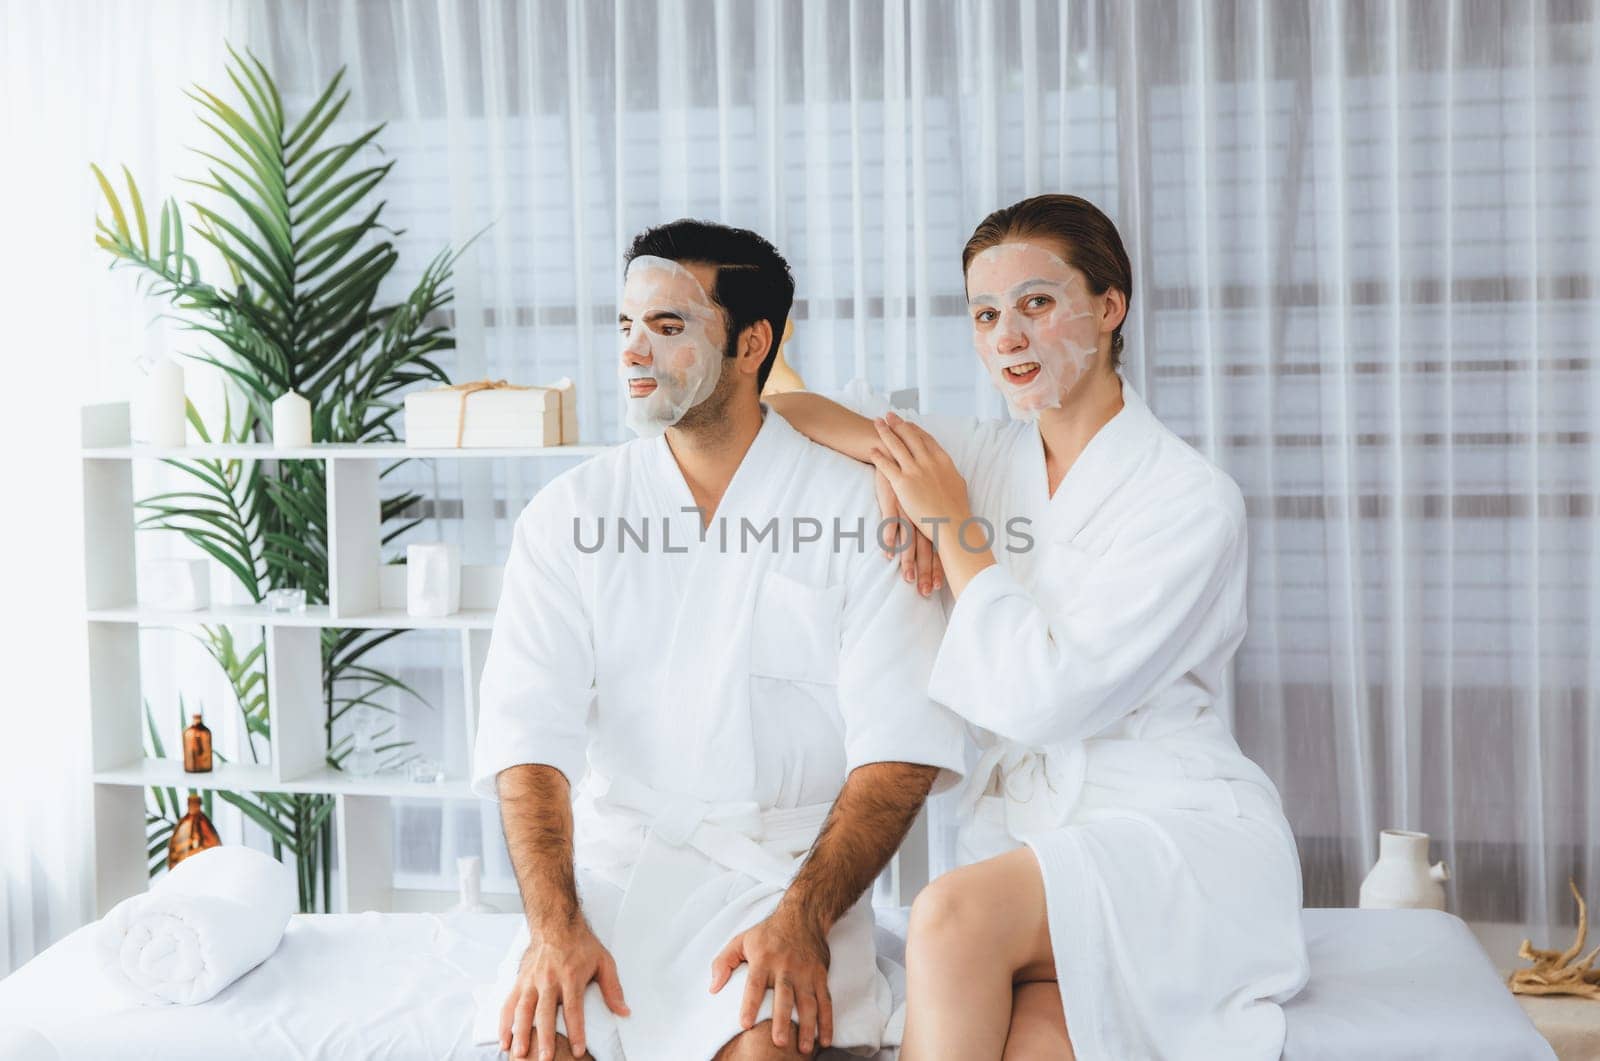 Serene modern daylight ambiance of spa salon, couple customer indulges in rejuvenating with facial skincare mask. Facial skin treatment and beauty cosmetology procedure for face. Quiescent